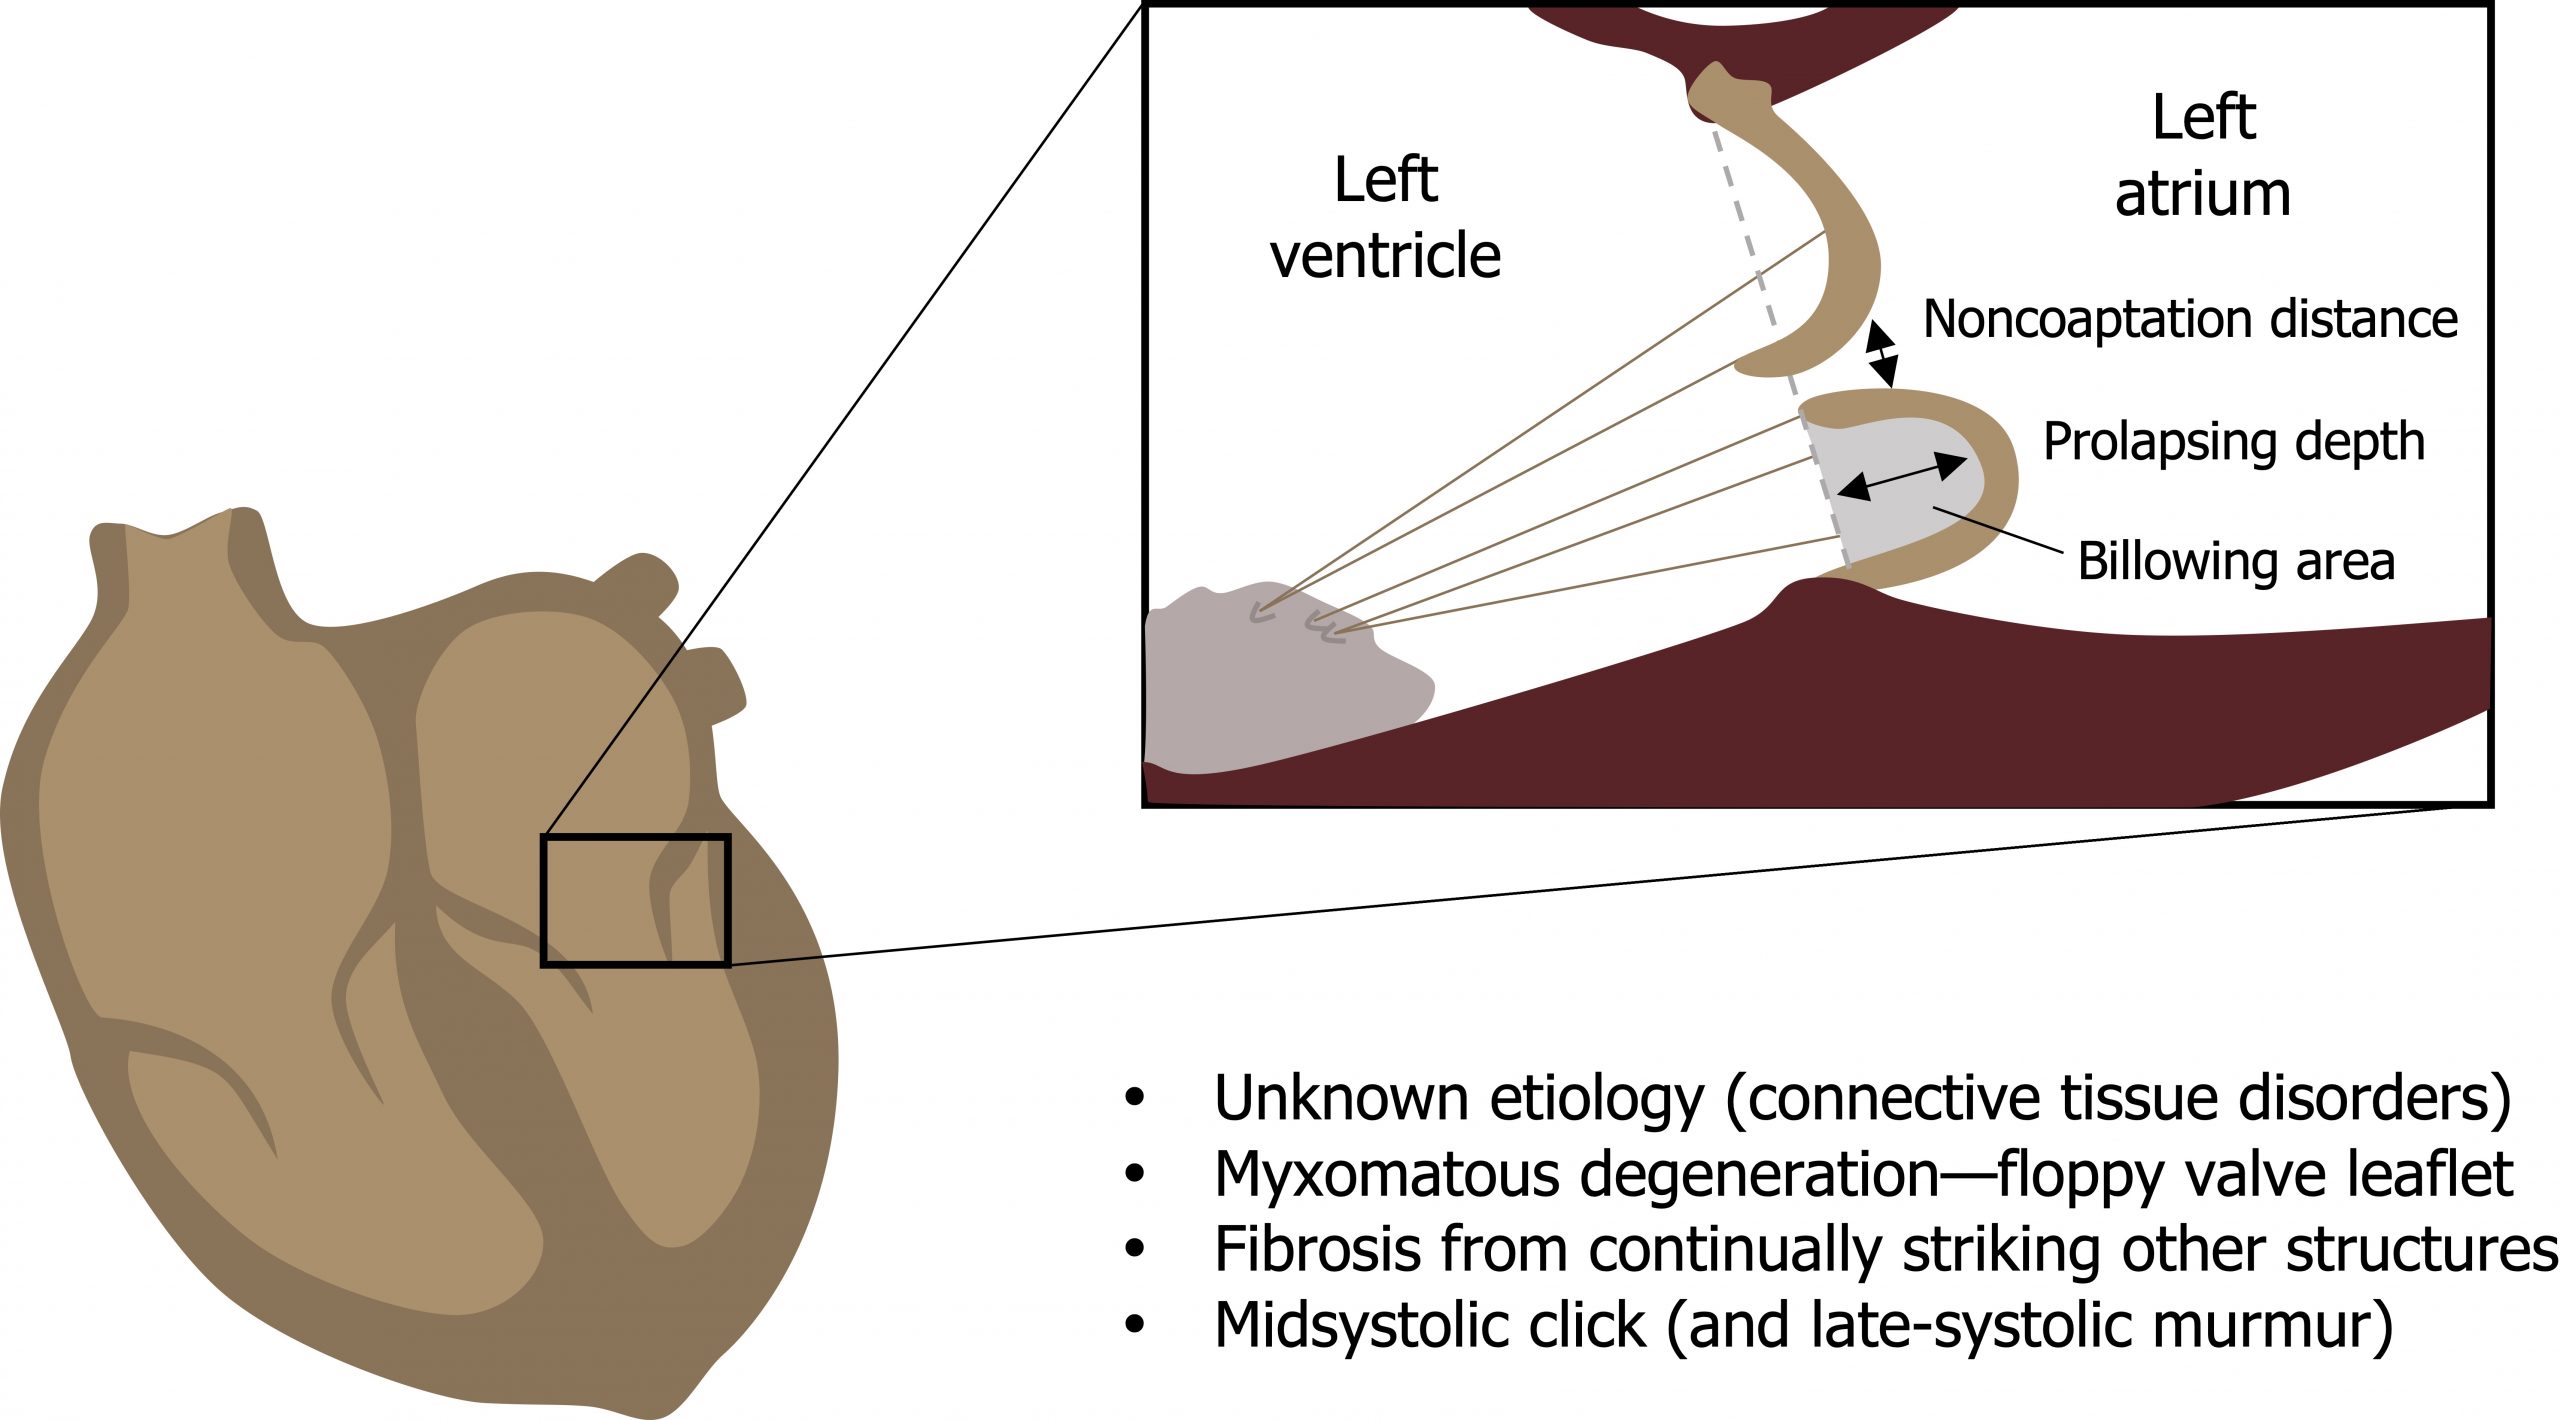 Figure of the heart with a circle around the mitral valve. Figure shows the left ventricle on the left and the left atrium on the right, separated by a vertical dotted line. A curved line on the top of the dotted line and an unconnected arched line on the bottom of the dotted line, with bodies in the left atrium. Arrow between the two lines labeled non-coaptation distance. Arrow from dotted line to top of arched line labeled prolapsing death. Arrow from center of arched line to left atrium labeled billowing area. Text below the figure states: unknown etiology (connective tissue disorders), myxomatous degeneration - floppy valve leaflet, fibrosis from continually striking other structures, and mid systolic click (and late - systolic murmur).